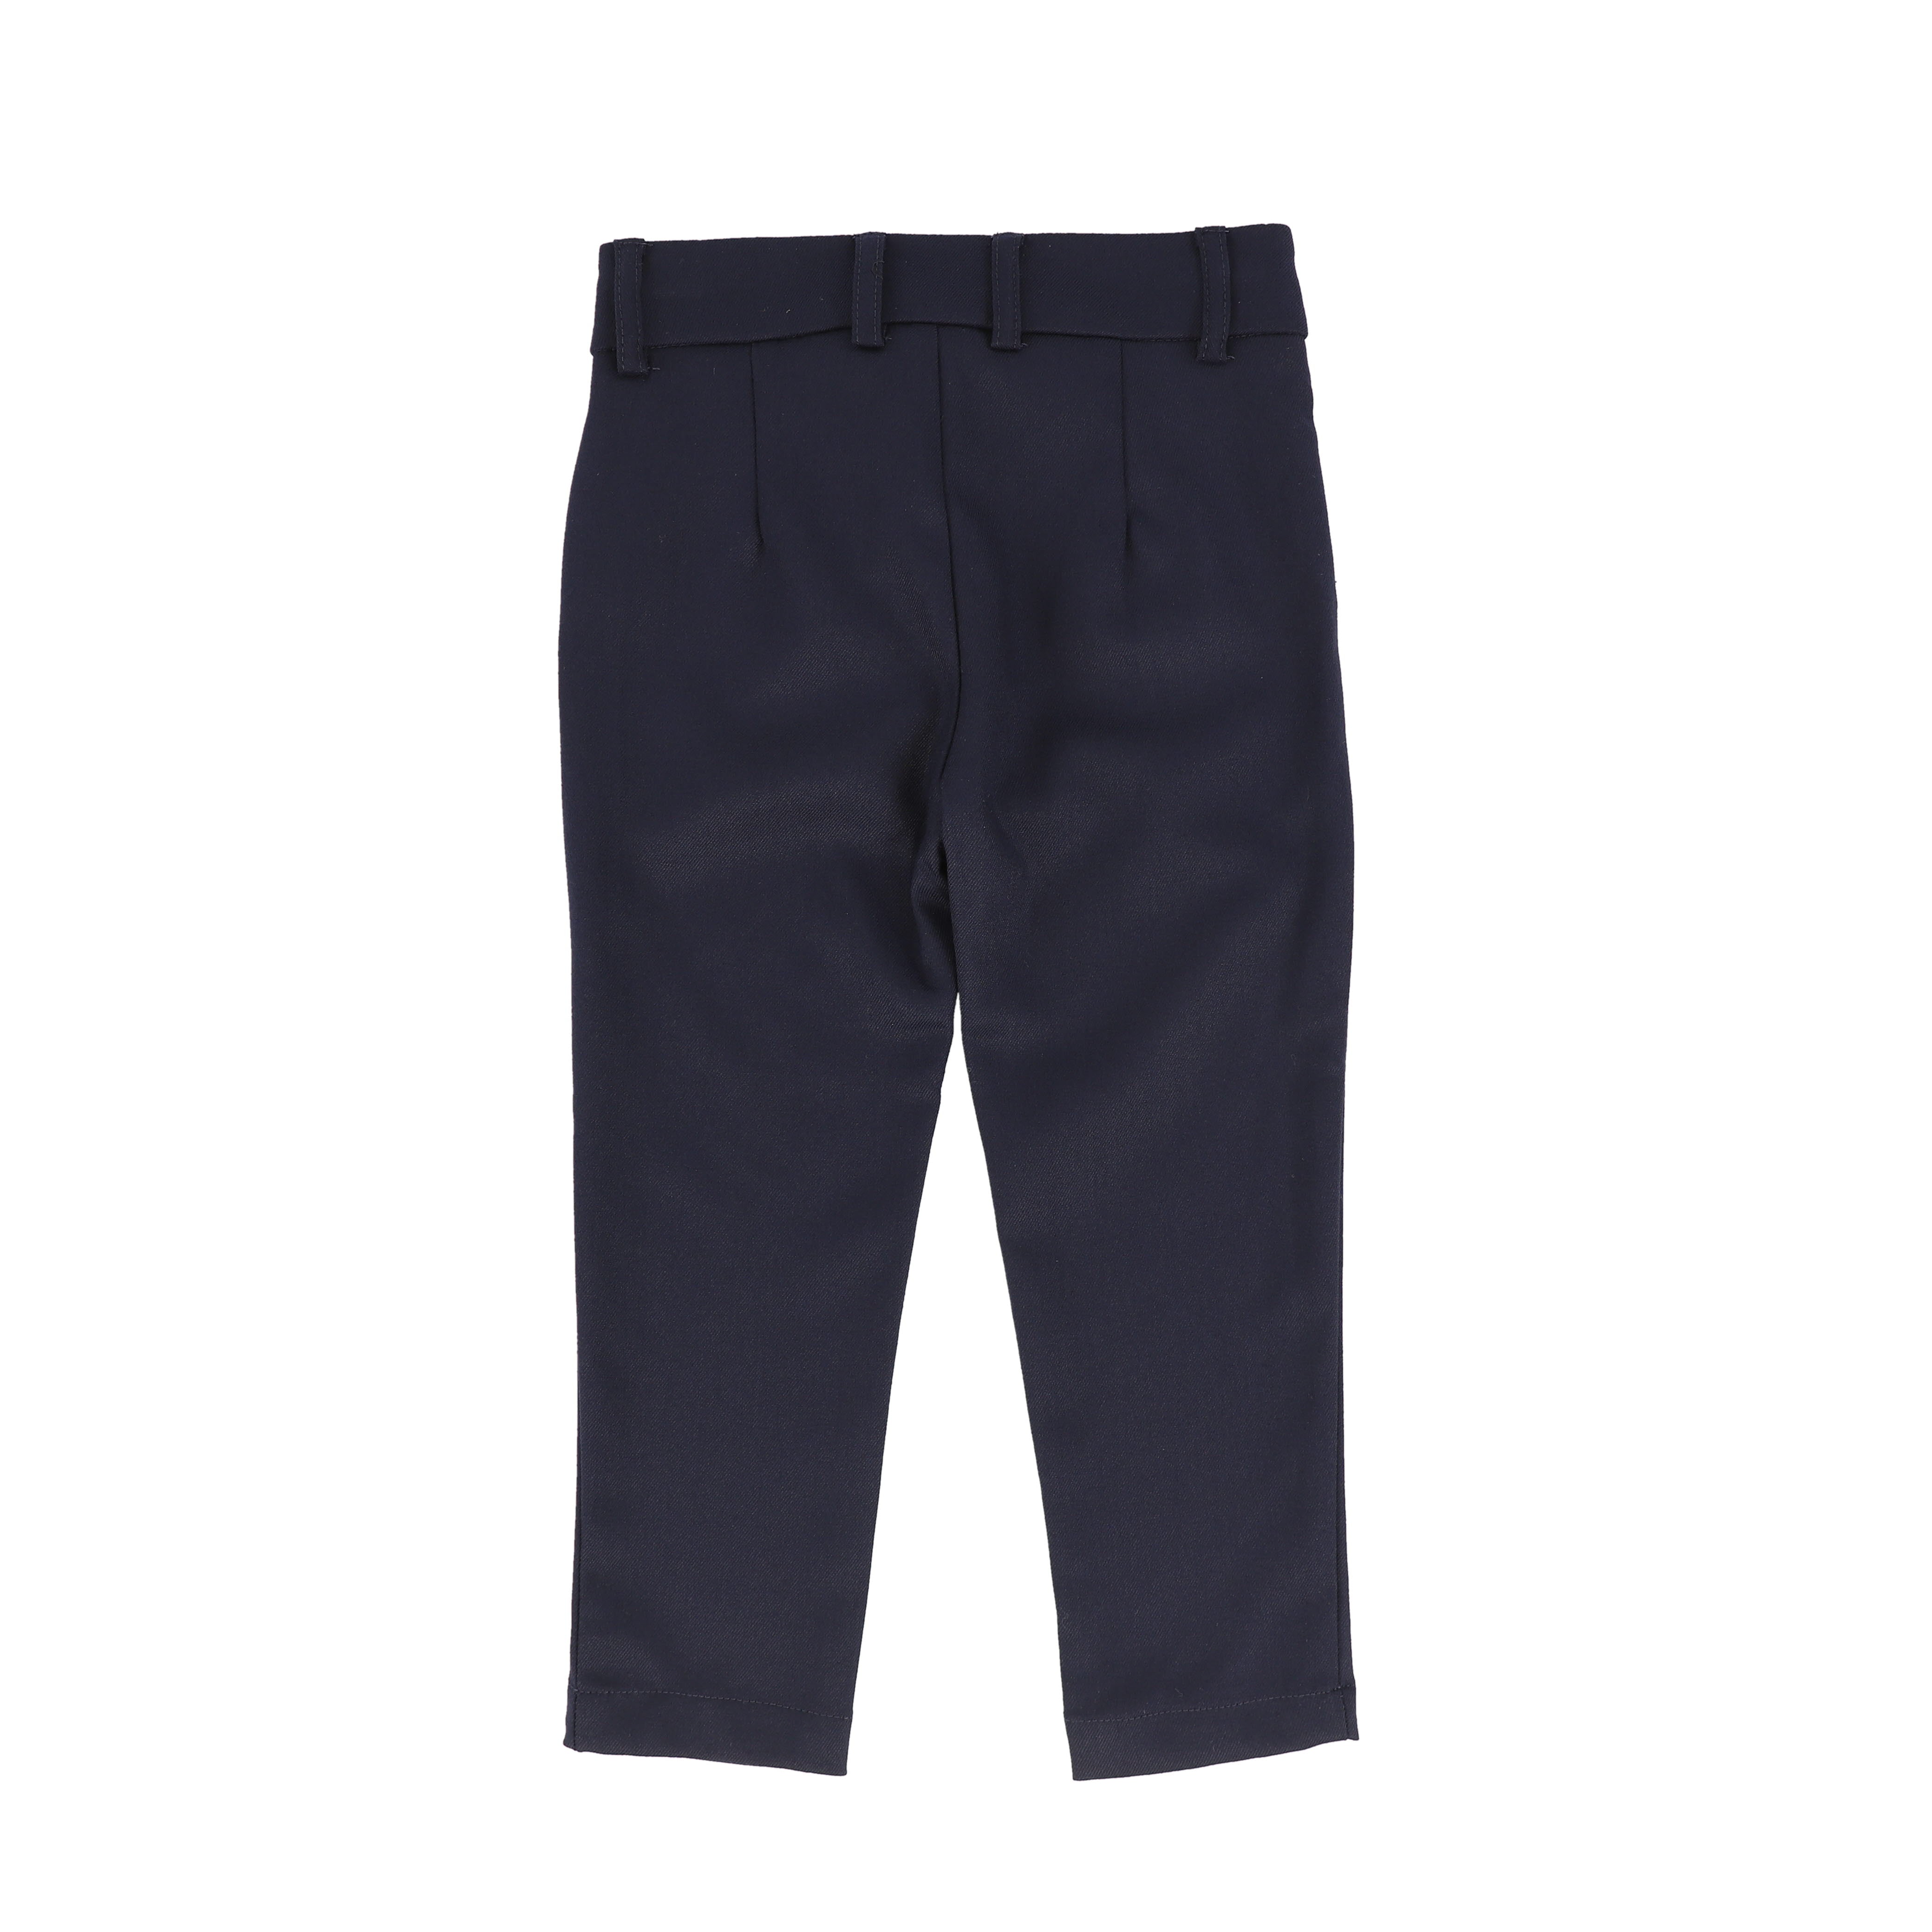 BAMBOO FITTED WOOL DRESS PANTS